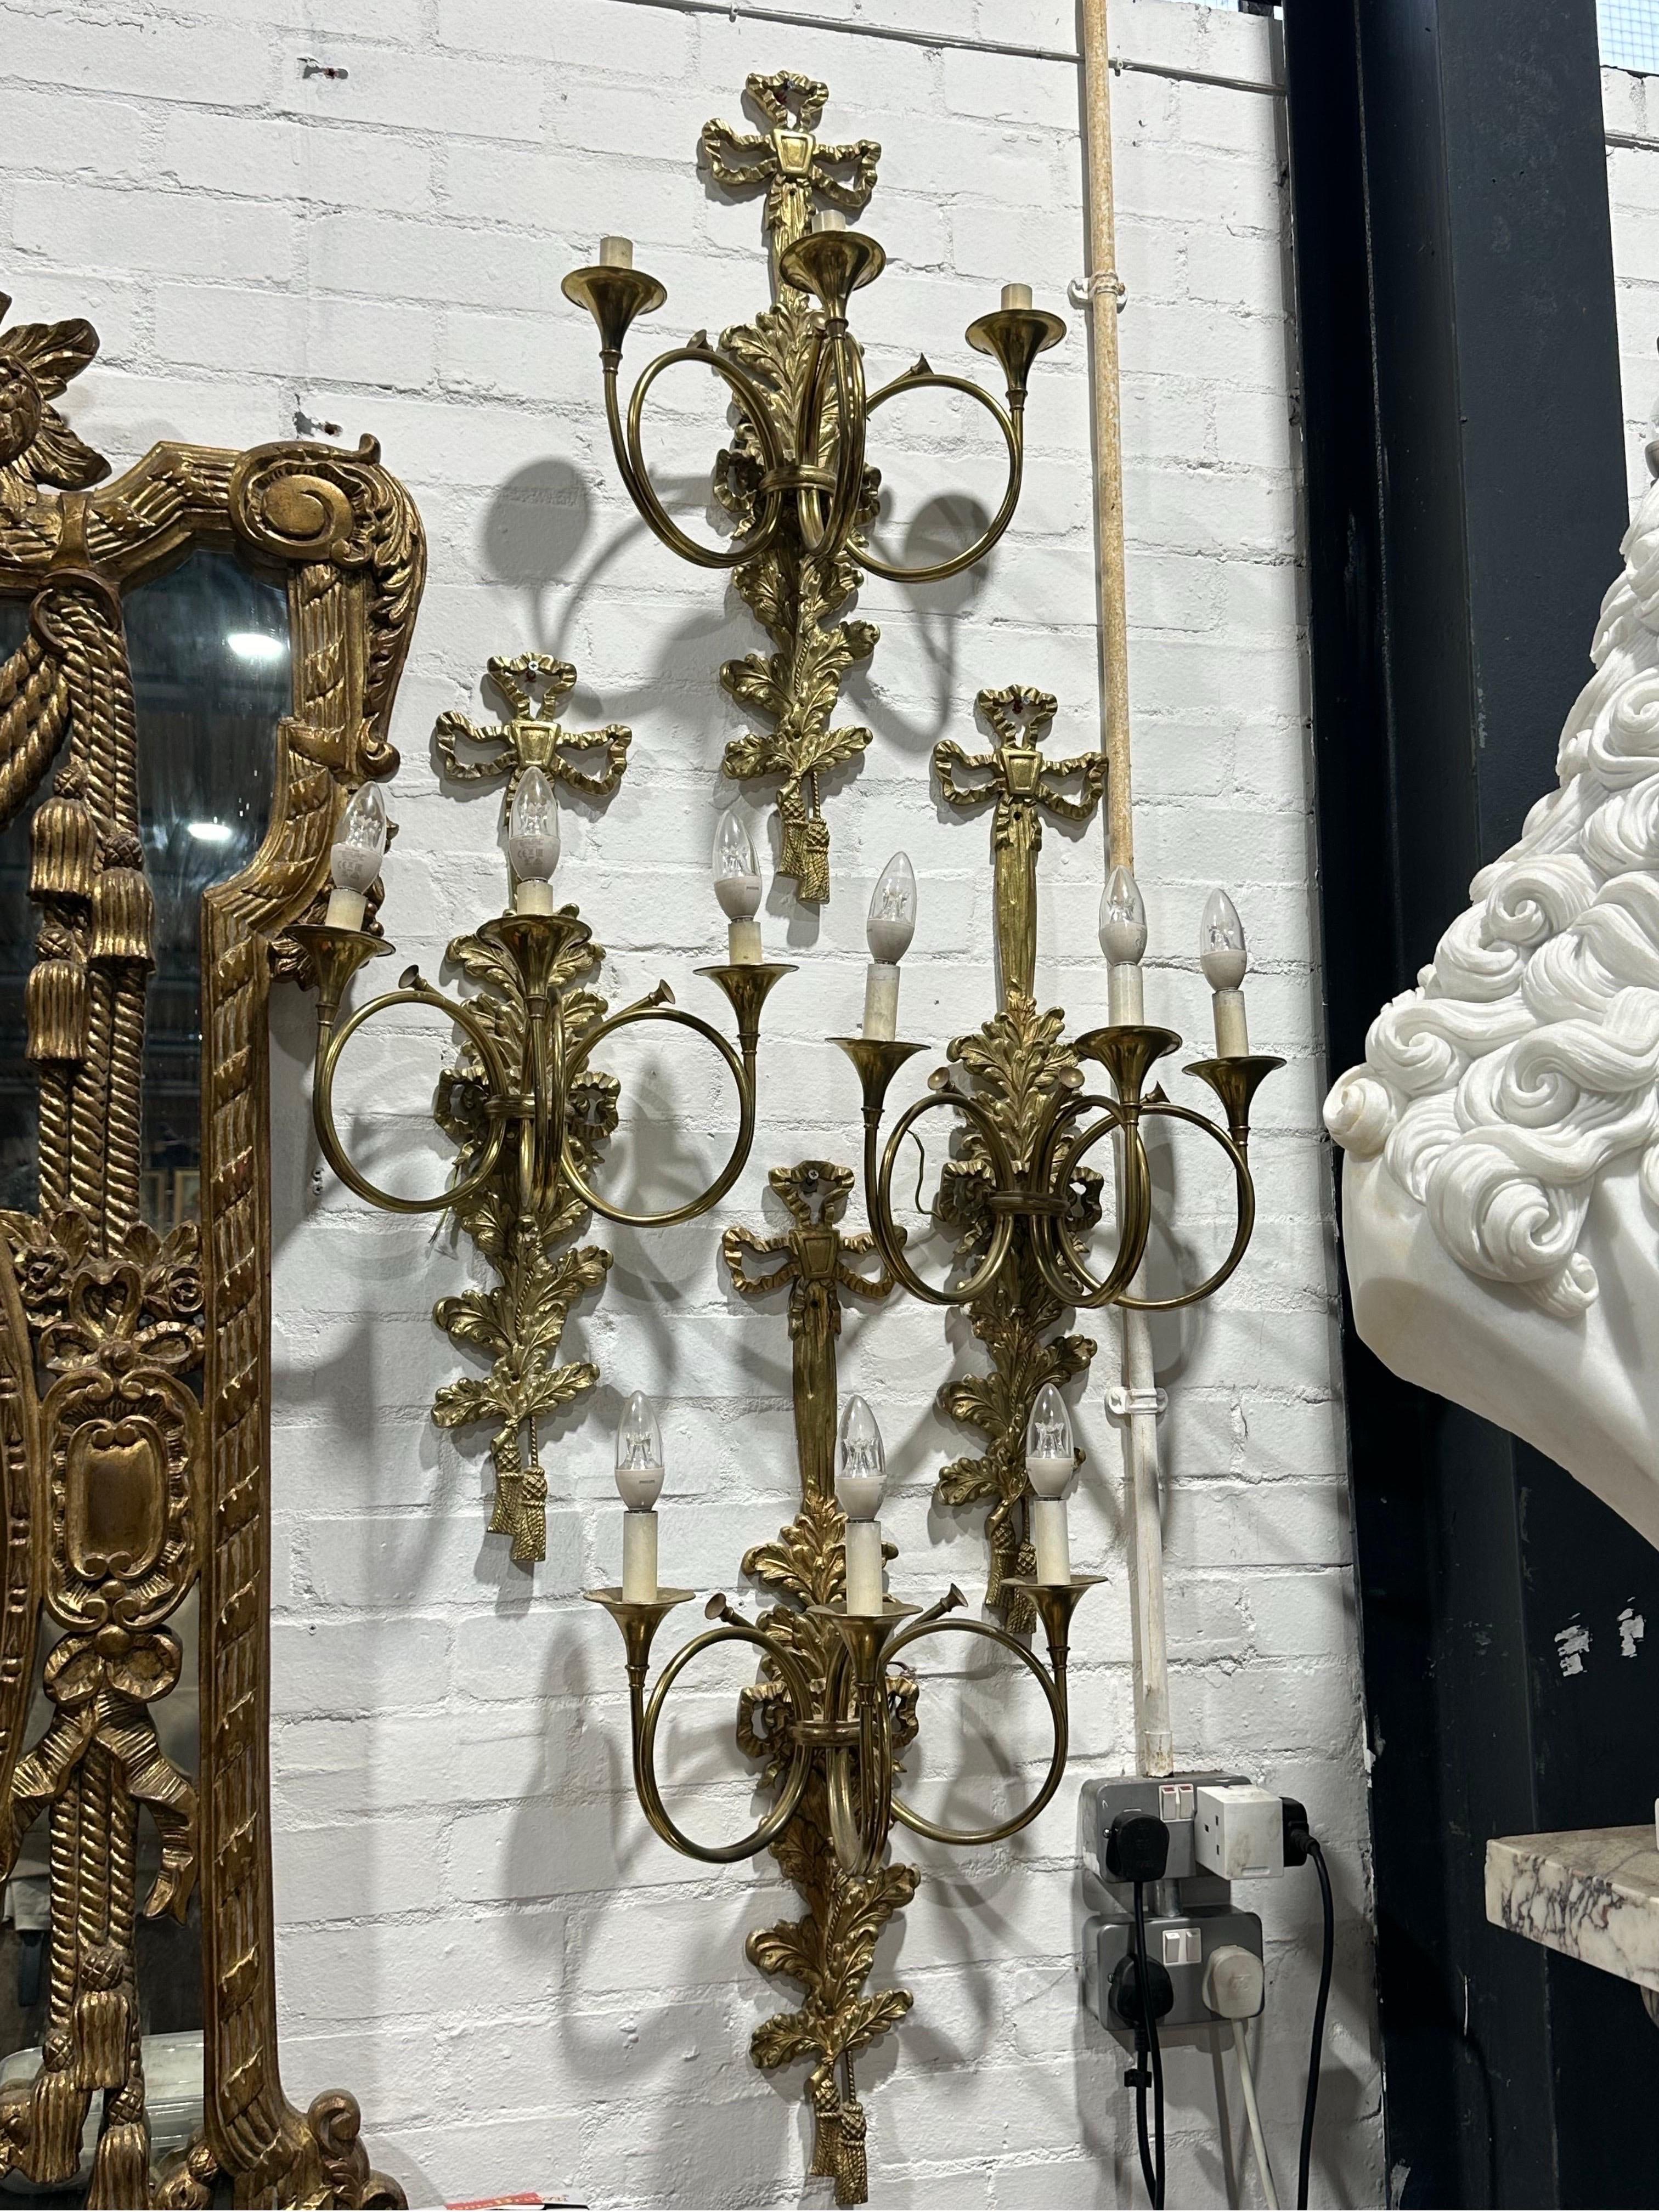 Illuminate your space with timeless elegance with our Victorian wall lights in an antique bronze finish, perfect for adding a touch of sophistication to the Randolph Hotel. Crafted in the style of the Victorian era, these exquisite wall lights exude